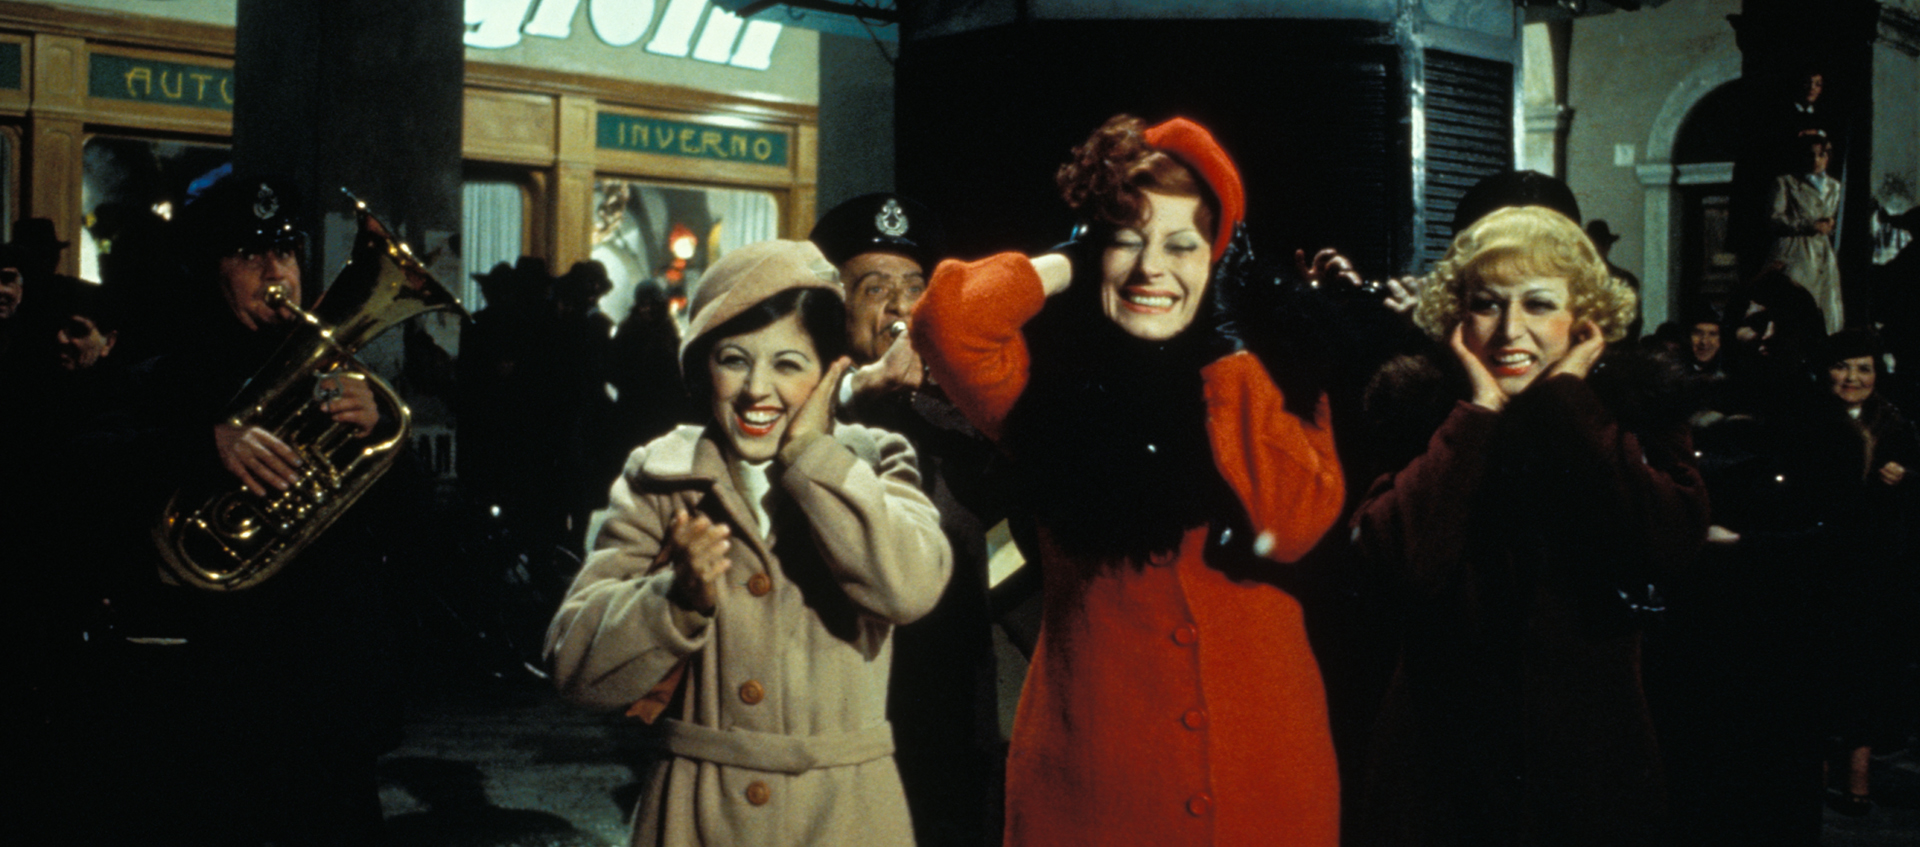 Still featuring Gradisca (Magali Noel), who is standing between two other women, all of whom are covering their ears as a band plays behind them. Gradisca wears a long red coat and matching hat.